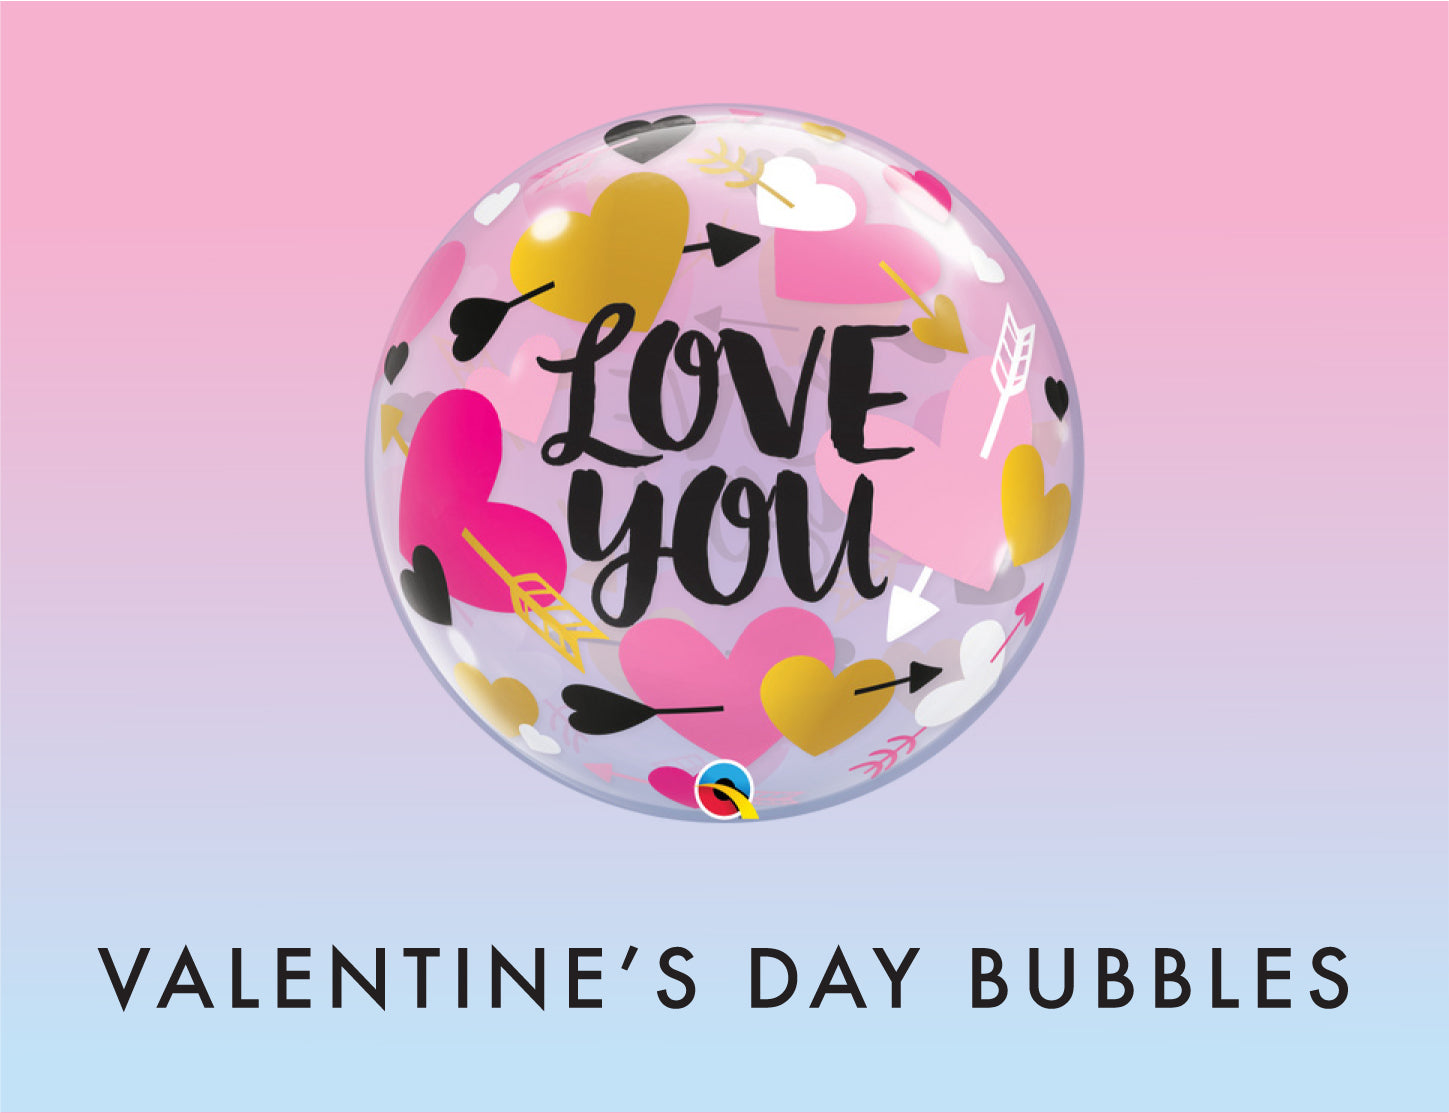 Valentine's Day Bubble Balloons